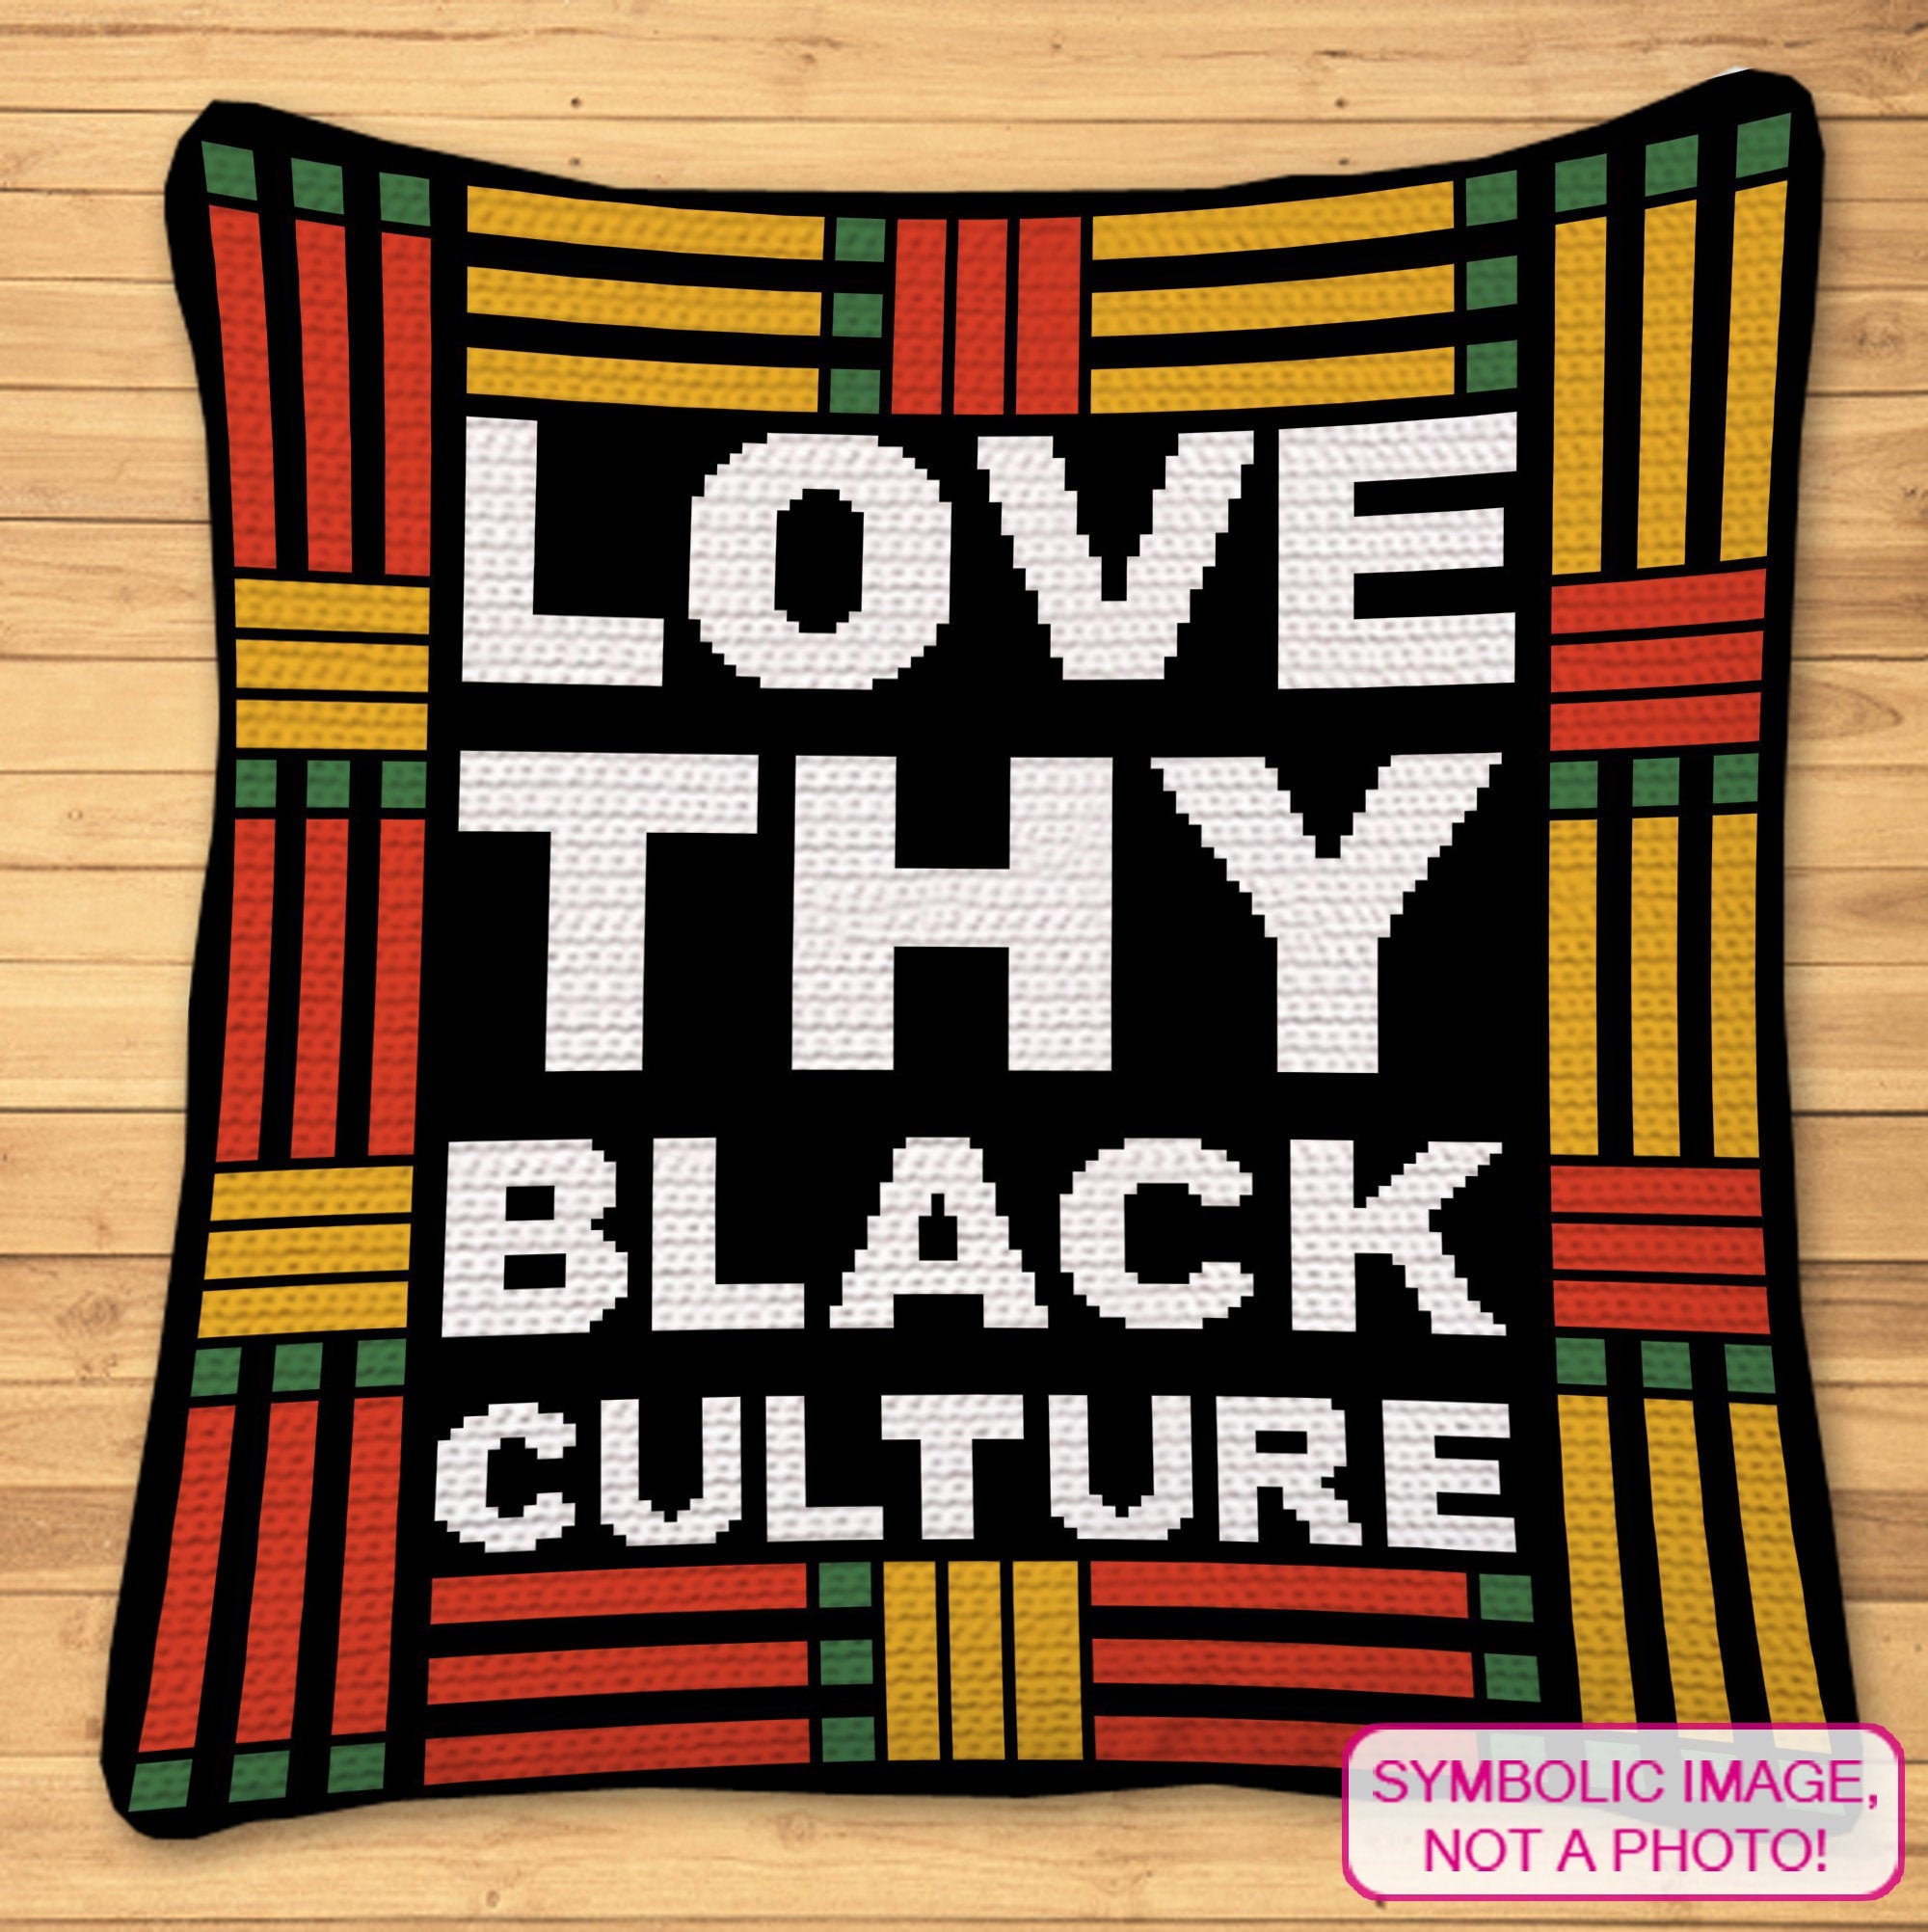 Celebrate the richness and beauty of Black culture with my captivating 'Love Thy Black Culture' Crochet Pillow Pattern. This design is a heartfelt reminder to embrace diversity, honor heritage, and spread love. Stitch your way to a harmonious and inclusive home decor! 